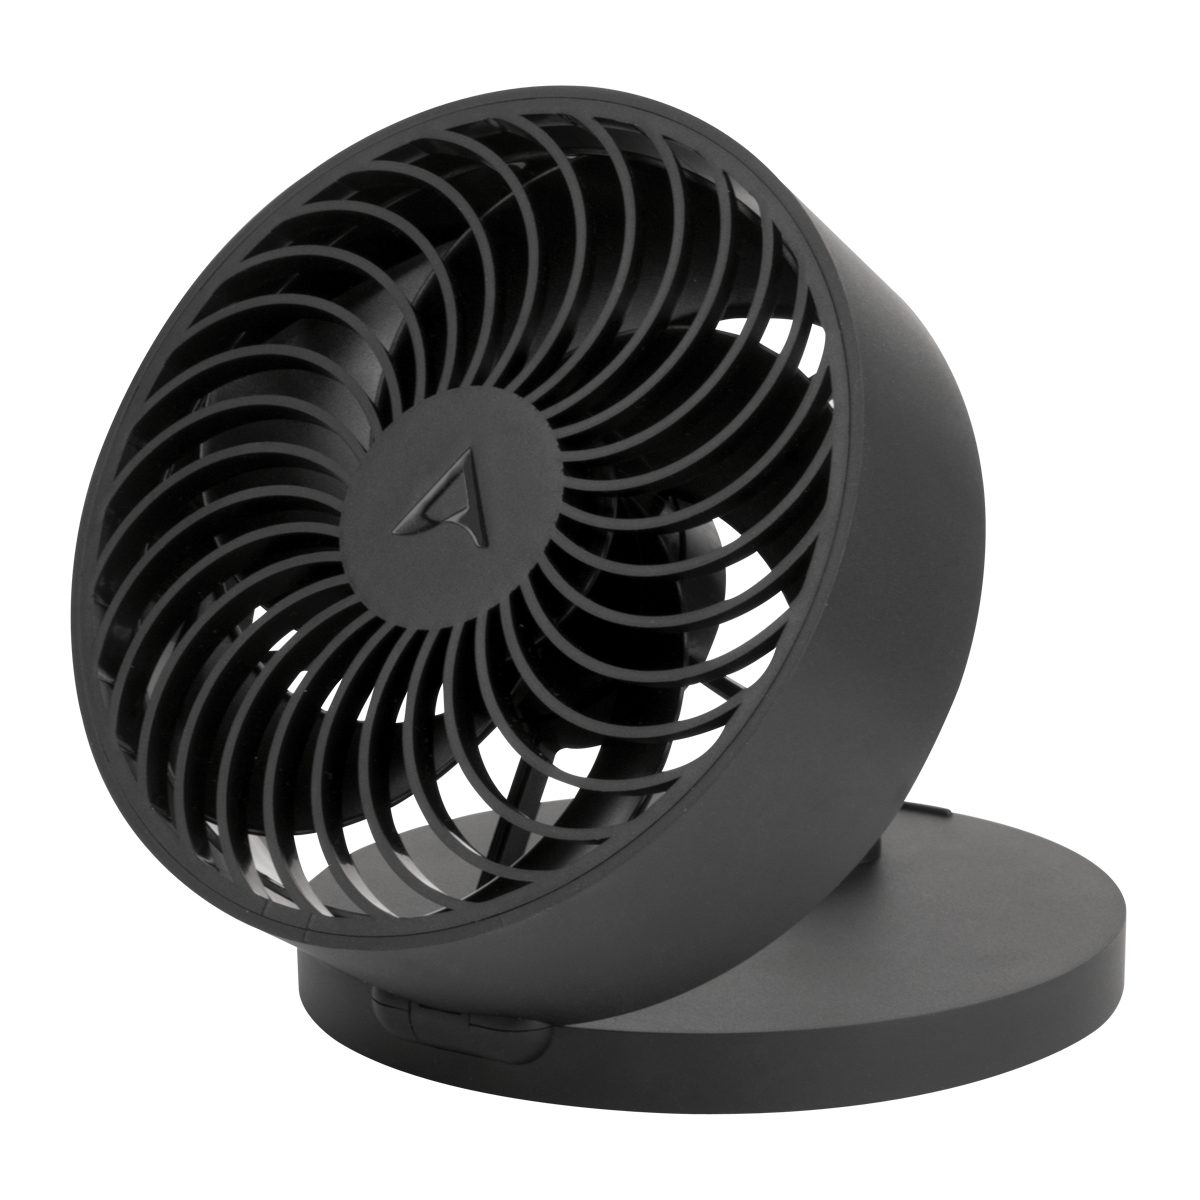 Arctic Summair Plus - Foldable Table Fan with Integrated Battery, Black - Arctic 2.35.64.00.119